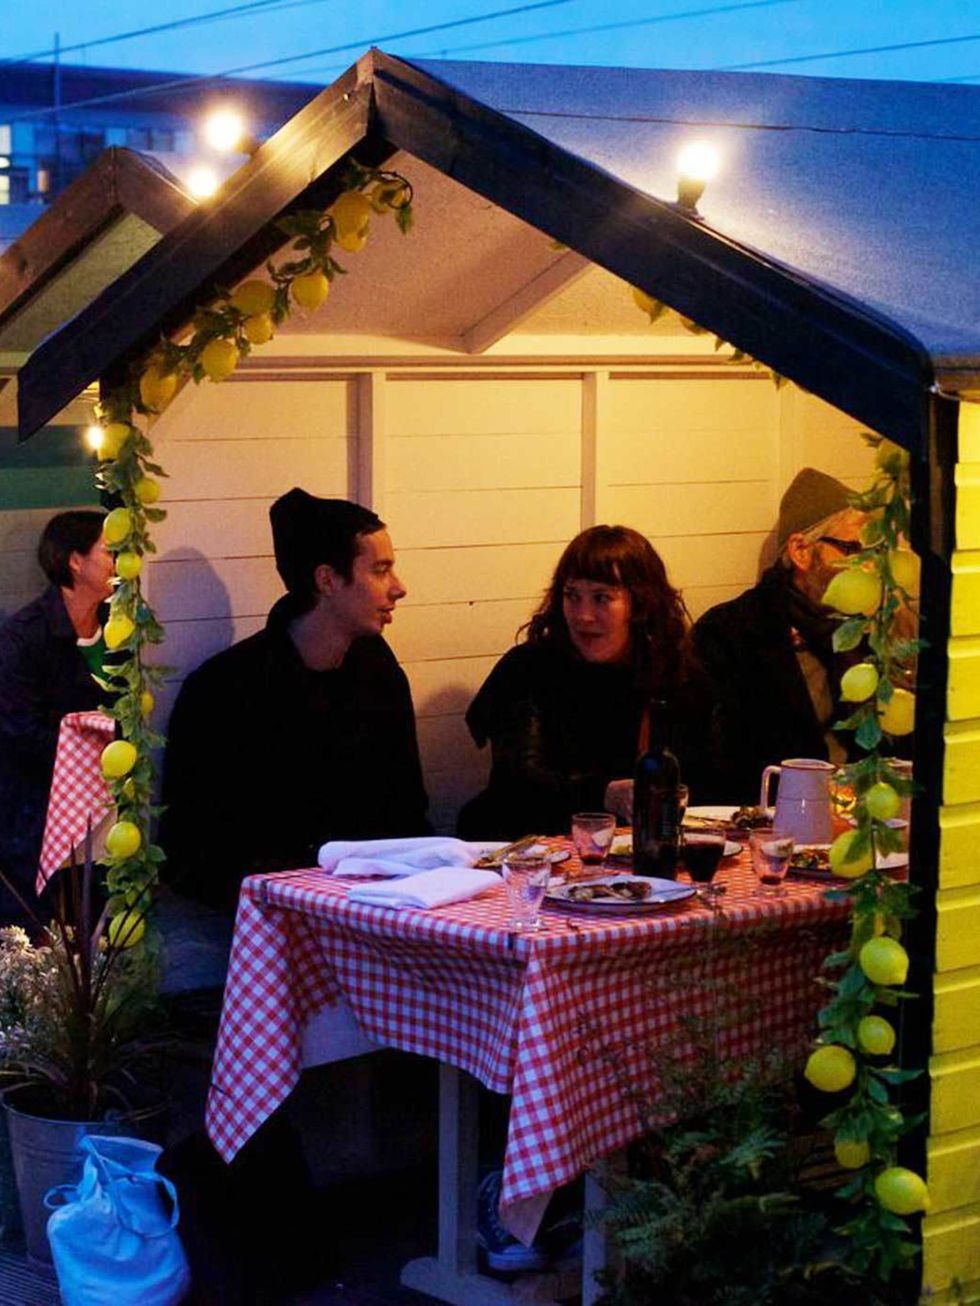 <p>Imagine Mediterranean cuisine served British picnic style. Coppa has opened as a pop-up restaurant in Hackney overlooking London fields. Even the unpredictable British climate wont put you off of this venue. Cozy colourful sheds and crochet blankets wi